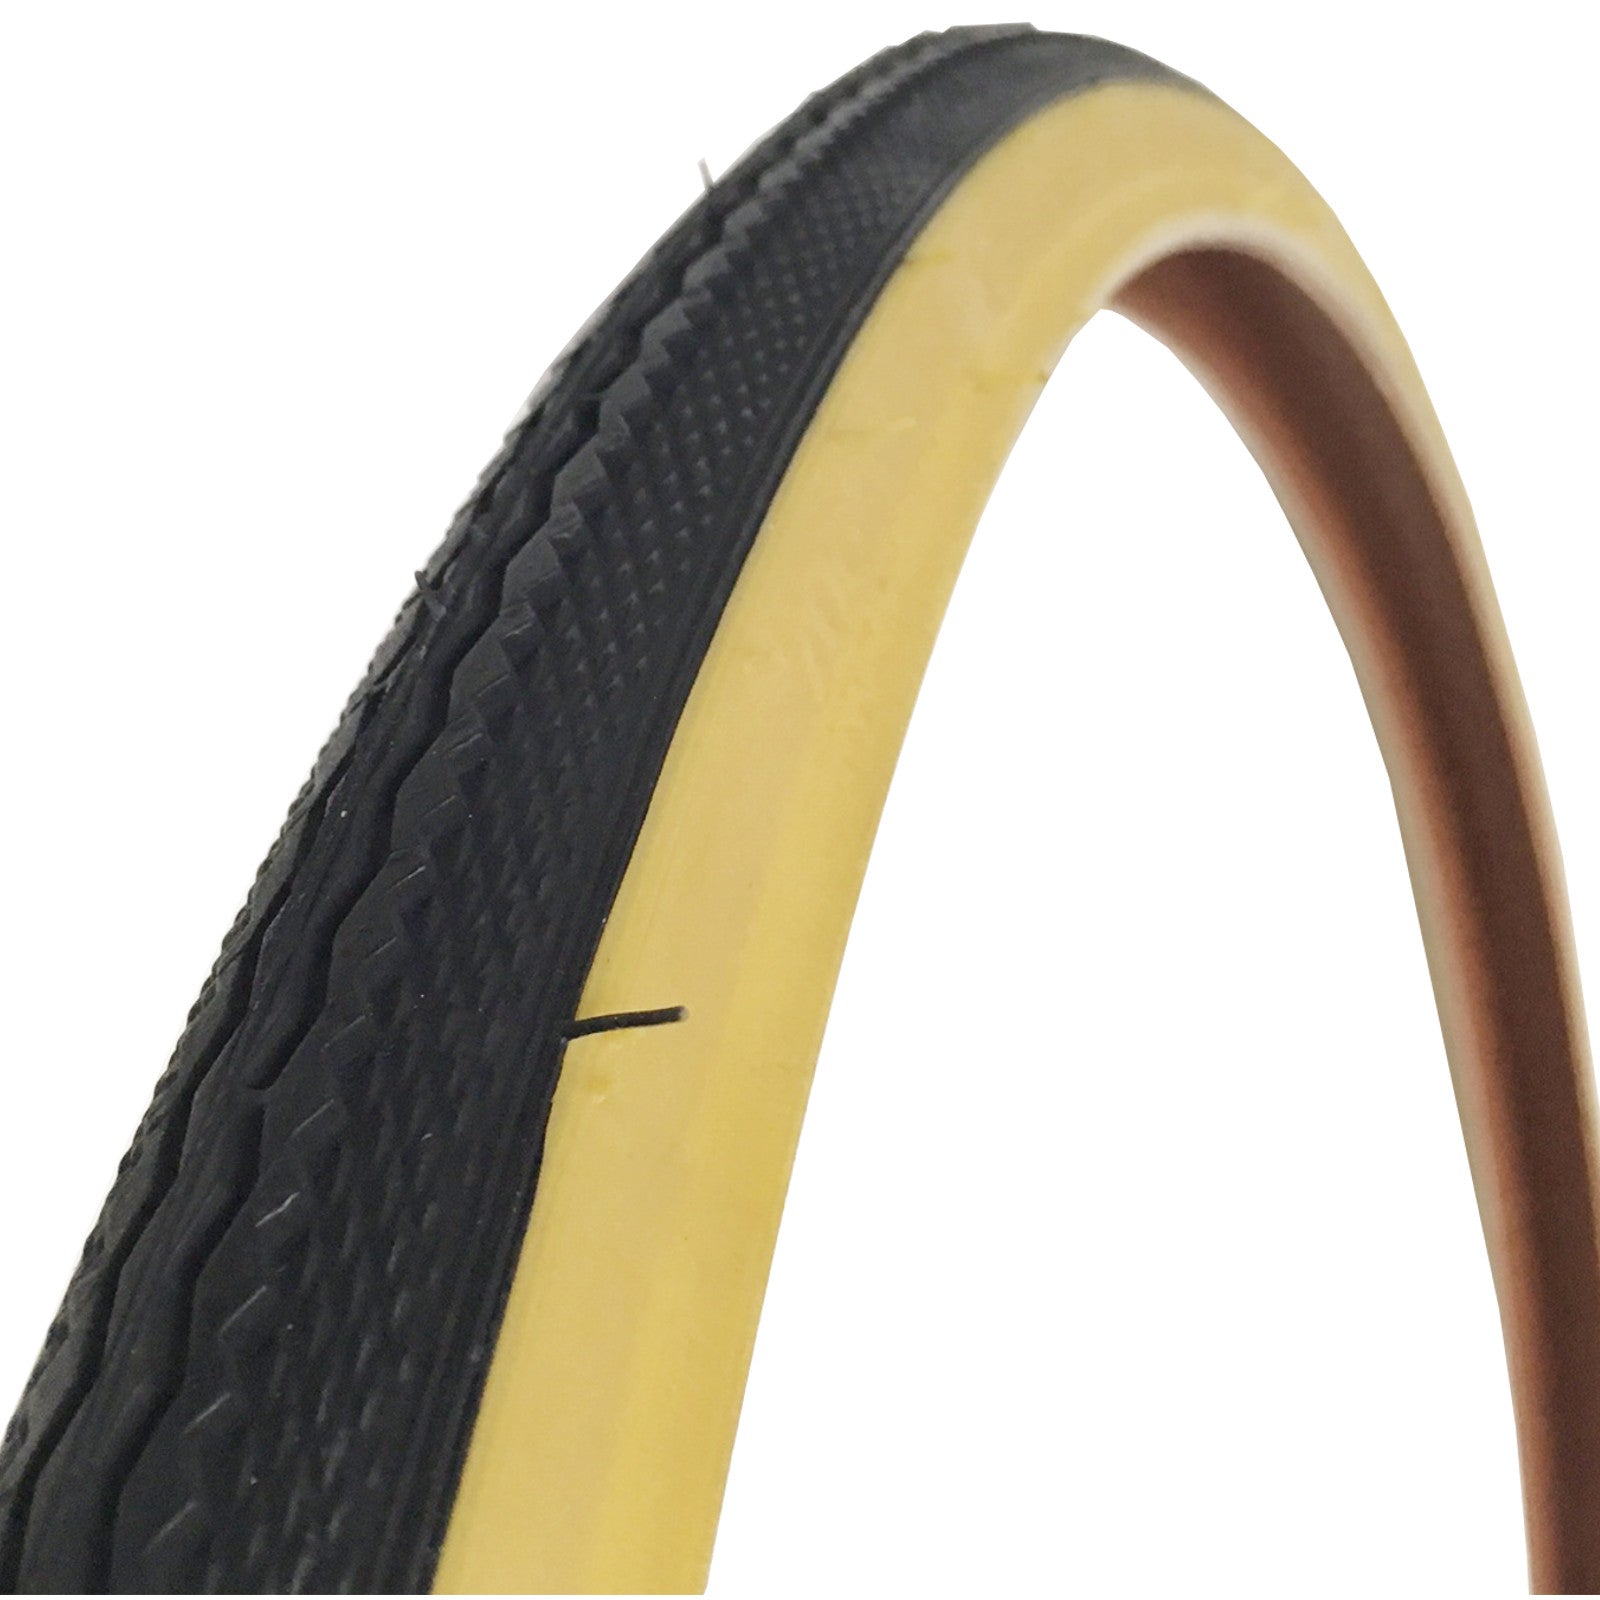 Raleigh CST T1240 Traditional 700 x 28c Road Bike Tyre